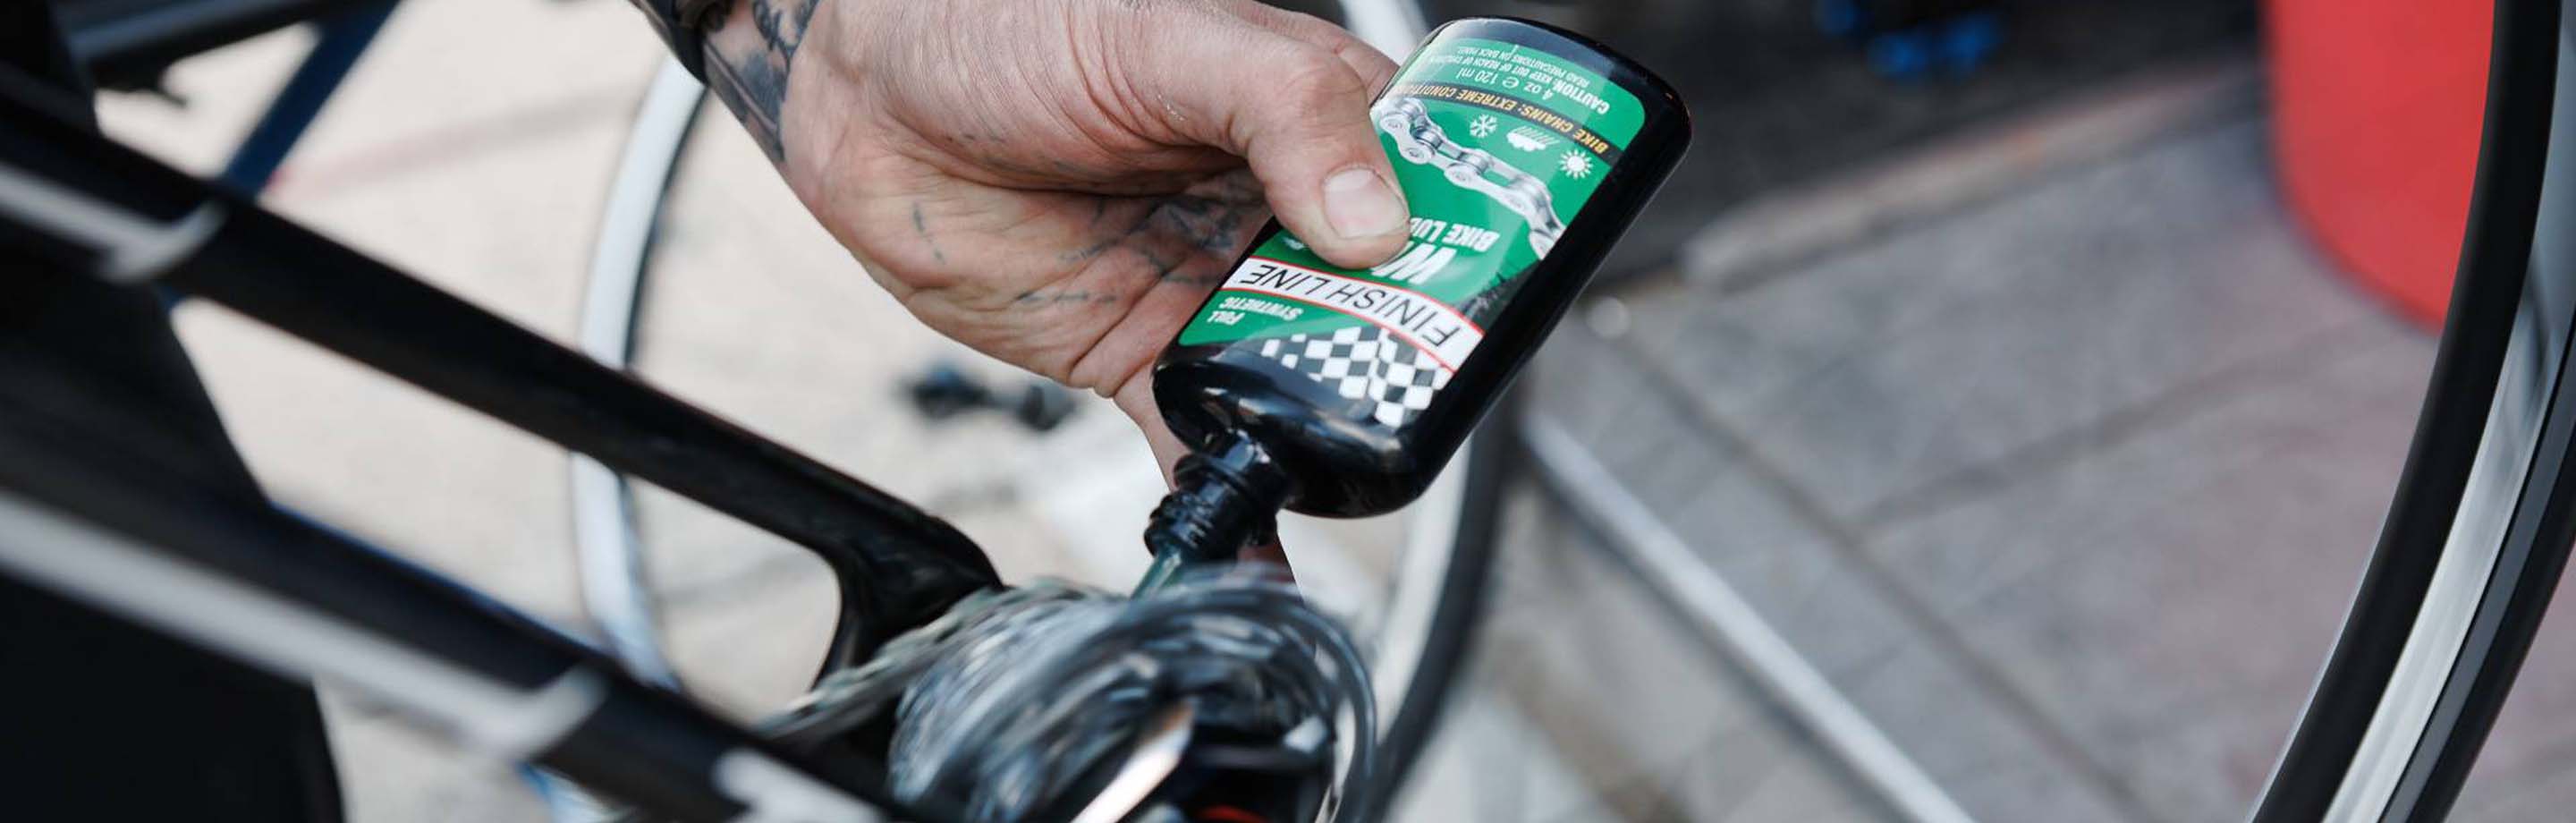 Finish Line Lube - The Best for Keeping Your Bike Clean and Well-Maintained